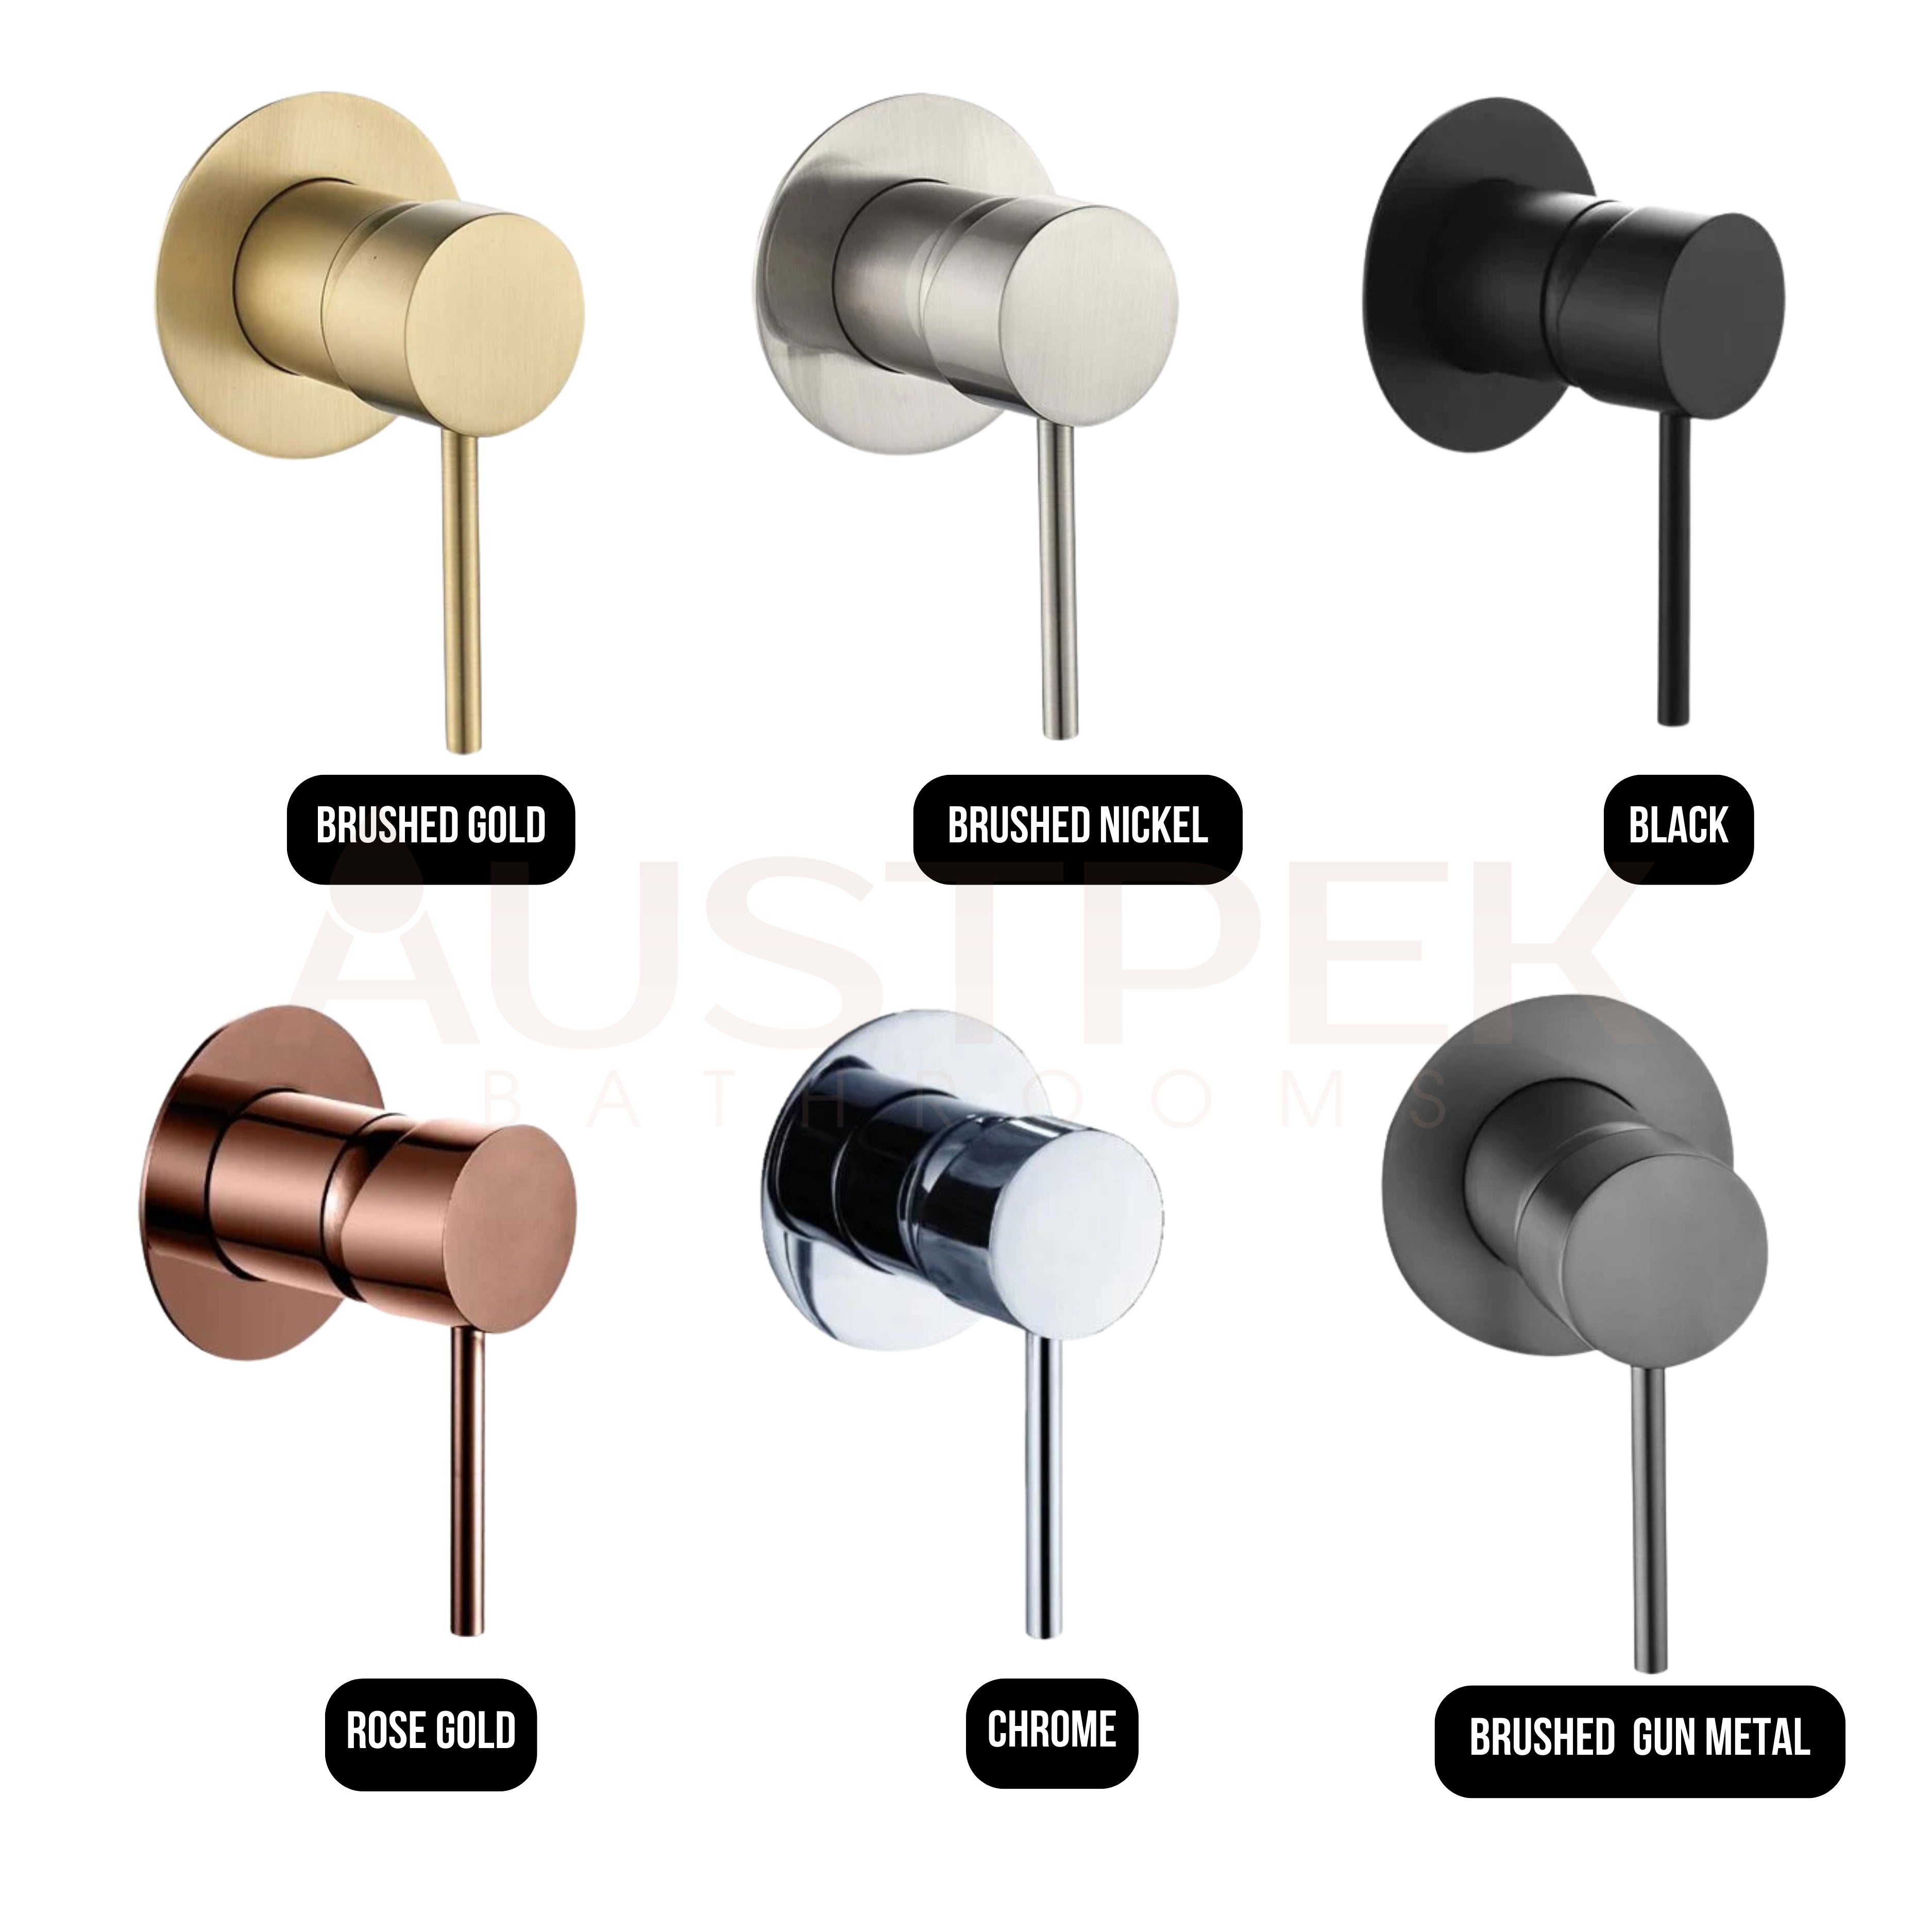 HELLYCAR IDEAL WALL MIXER BRUSHED NICKEL 35MM